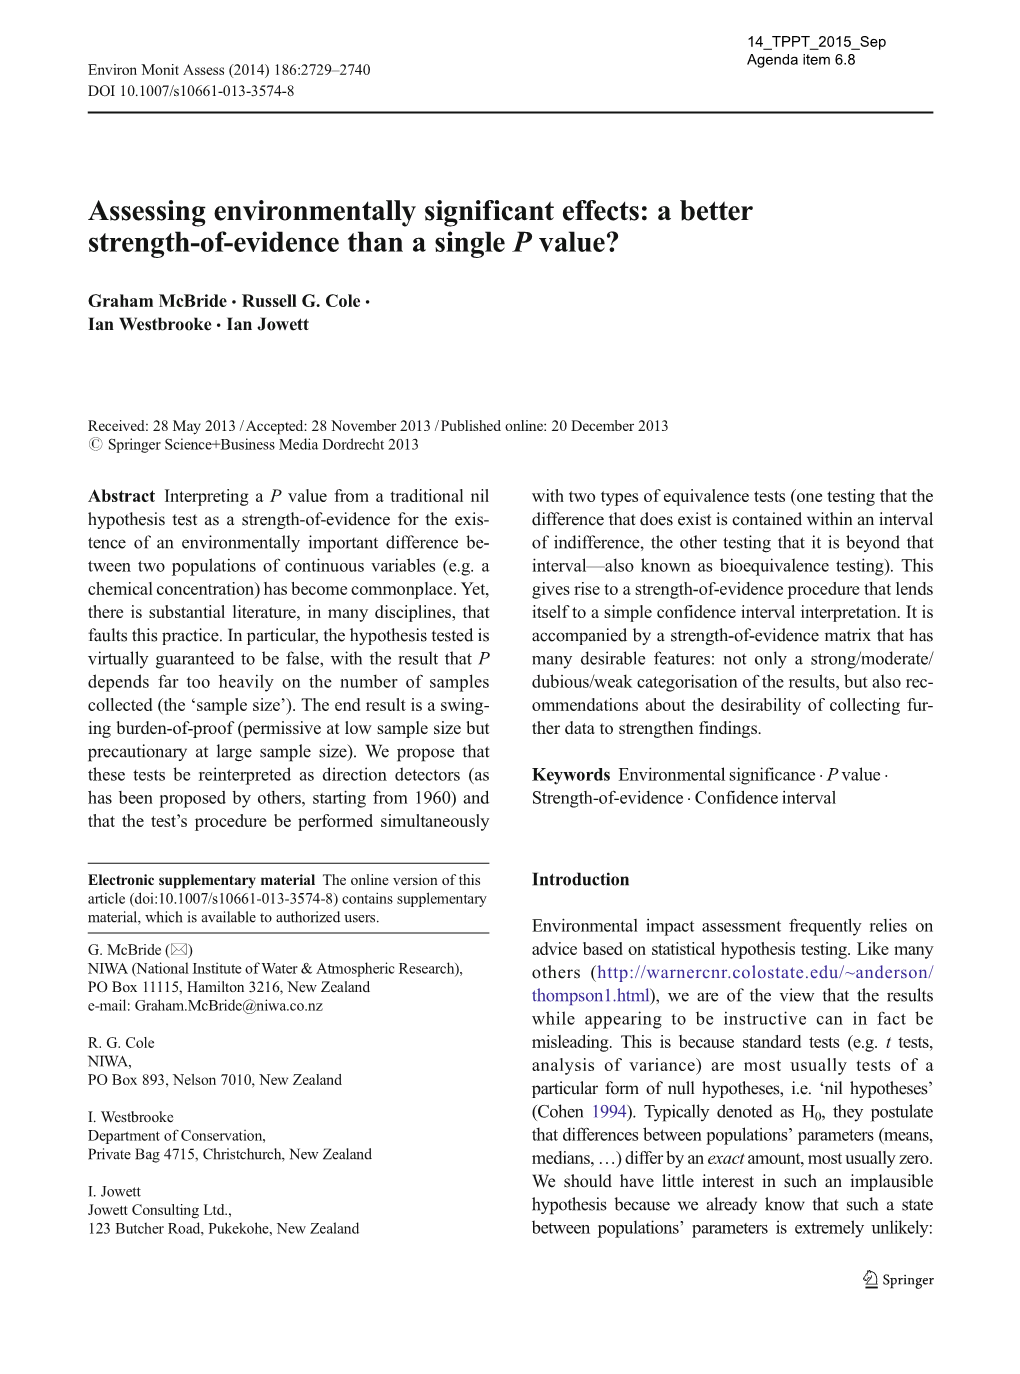 Assessing Environmentally Significant Effects: a Better Strength-Of-Evidence Than a Single P Value?